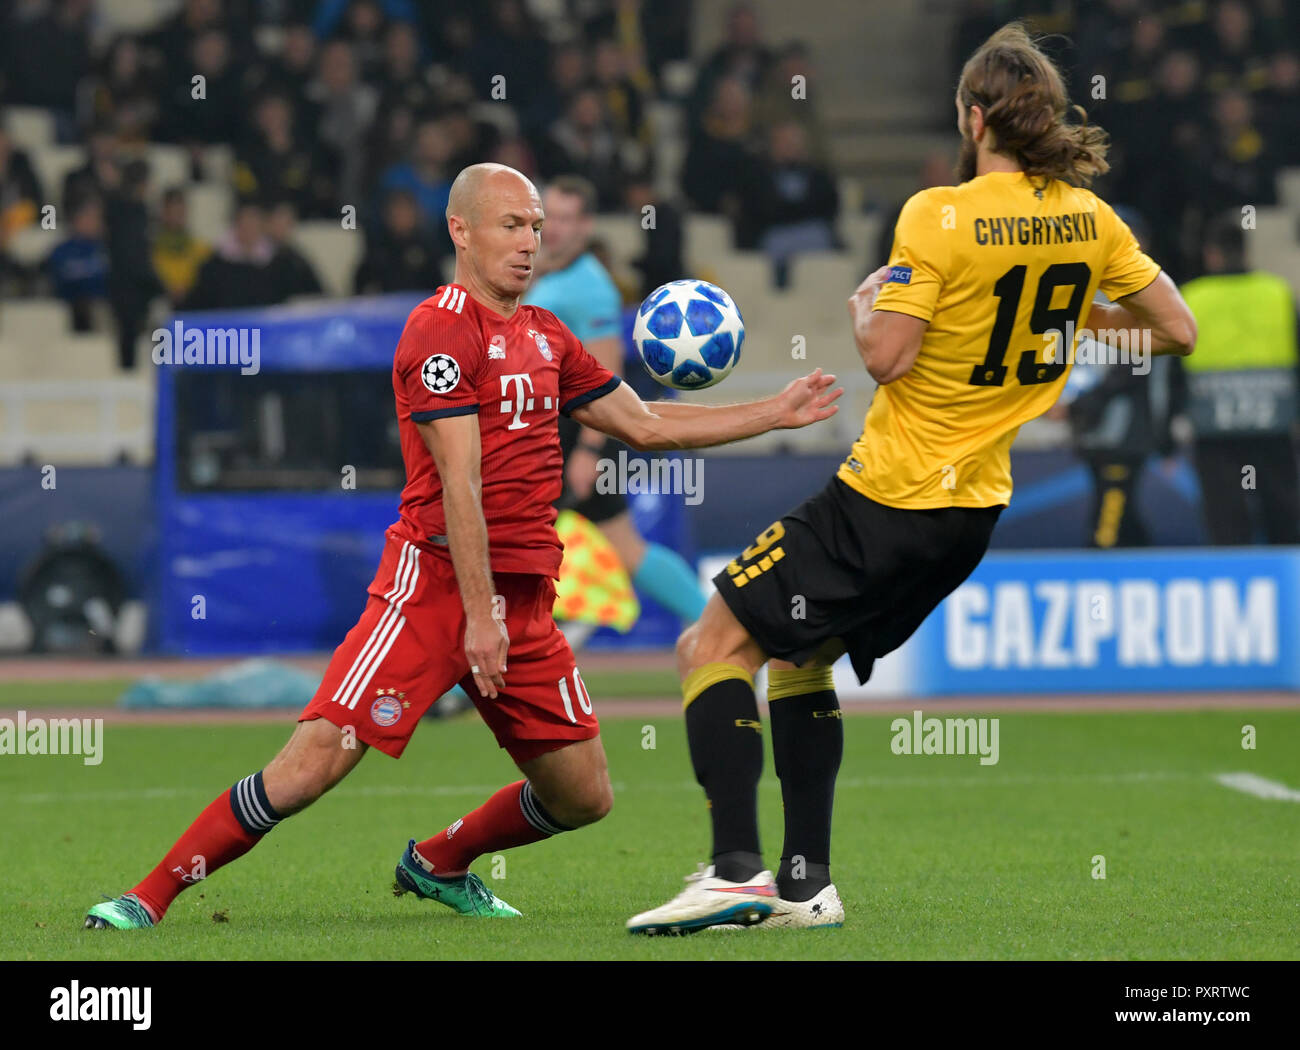 Athens, Greece. 23rd Oct, 2018. Soccer: Champions League, AEK Athens - Bayern  Munich, group stage, group E, 3rd matchday on 23.10.2018 in Athens. Arjen  Robben (l) from FC Bayern Munich fights for